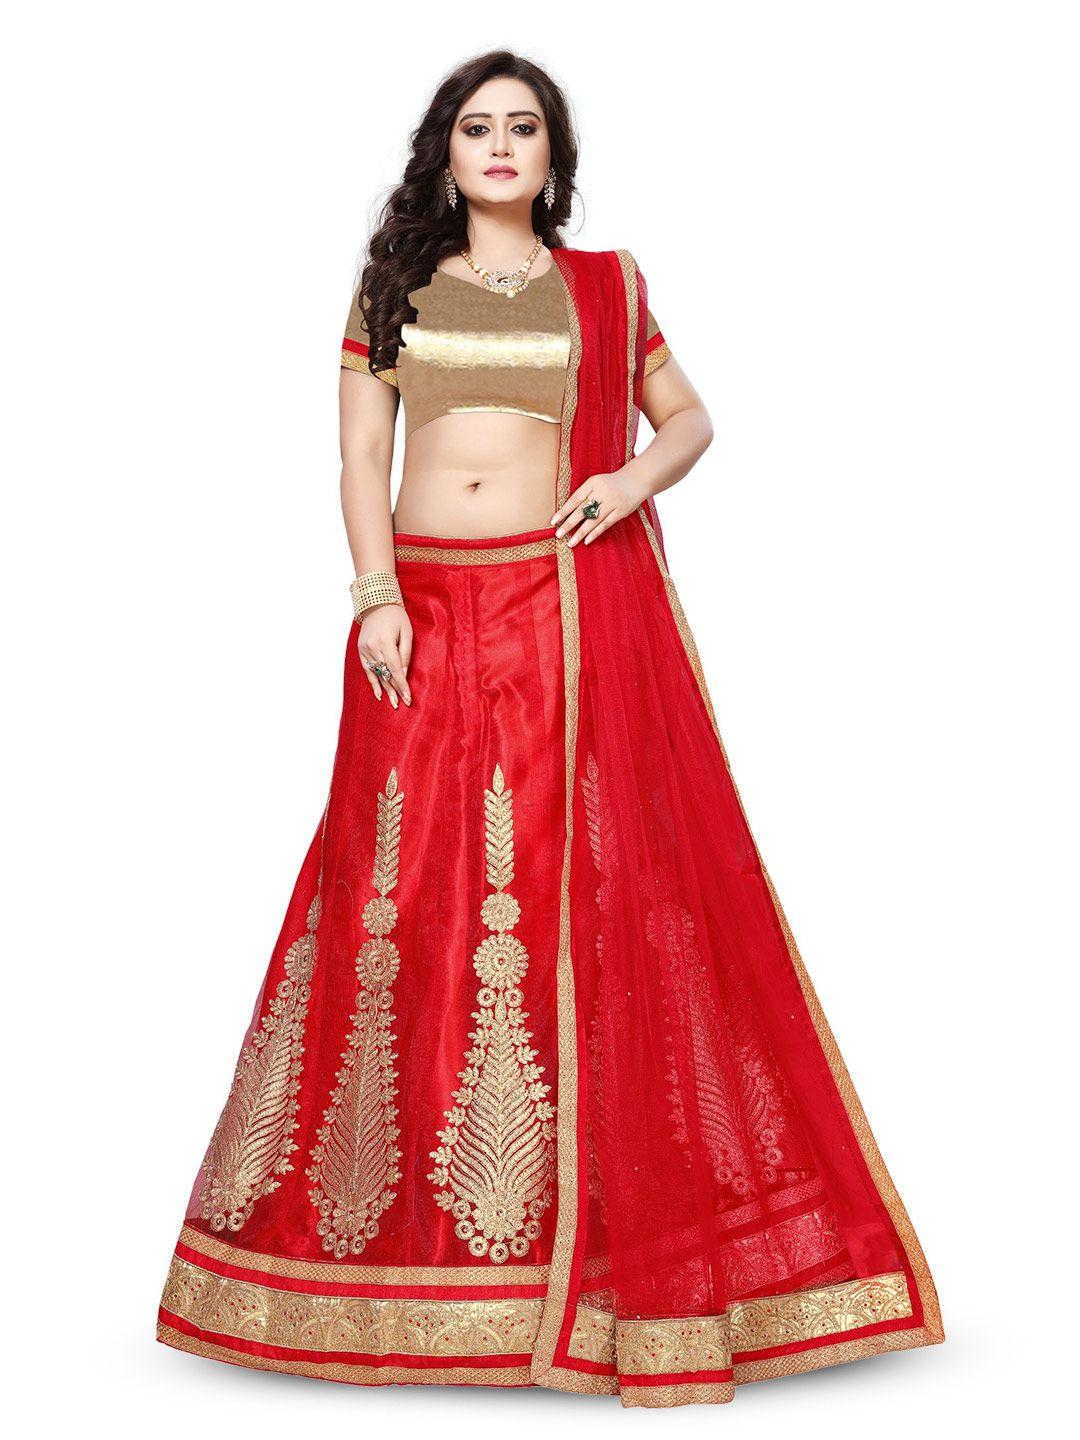 manvaa beads and stones semi-stitched lehenga & unstitched blouse with dupatta